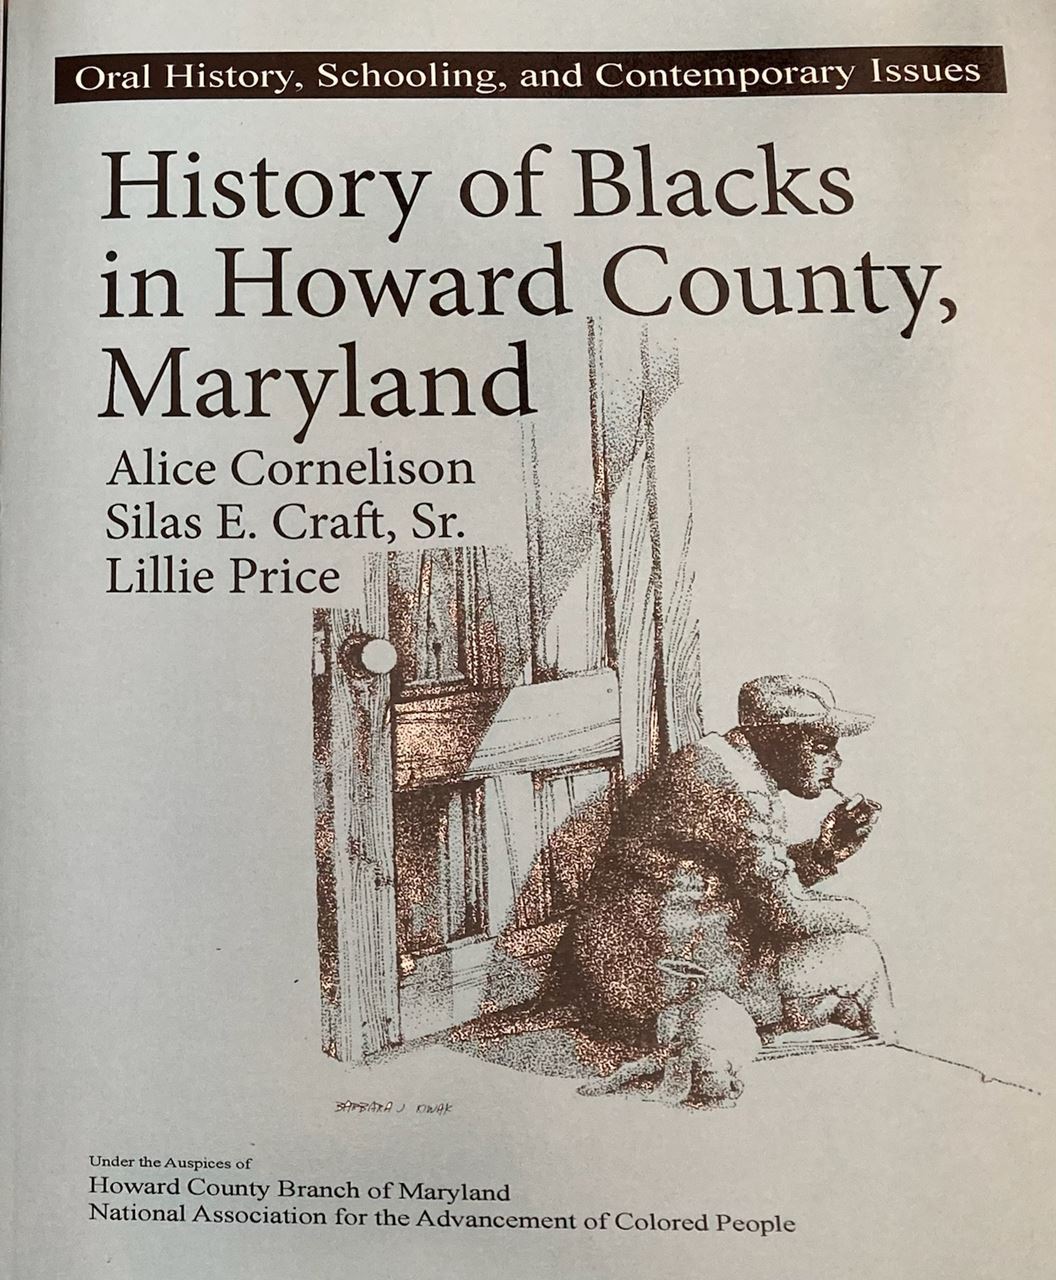 book cover - History of Blacks in Howard County, Maryland by Alice Cornelison, Alias E Craft Sr, Lillie Price. Image in the center: black and white drawing of a dark skinned man, sitting on a step in front of a door, lighting a cigarette, with a dog laying beside him